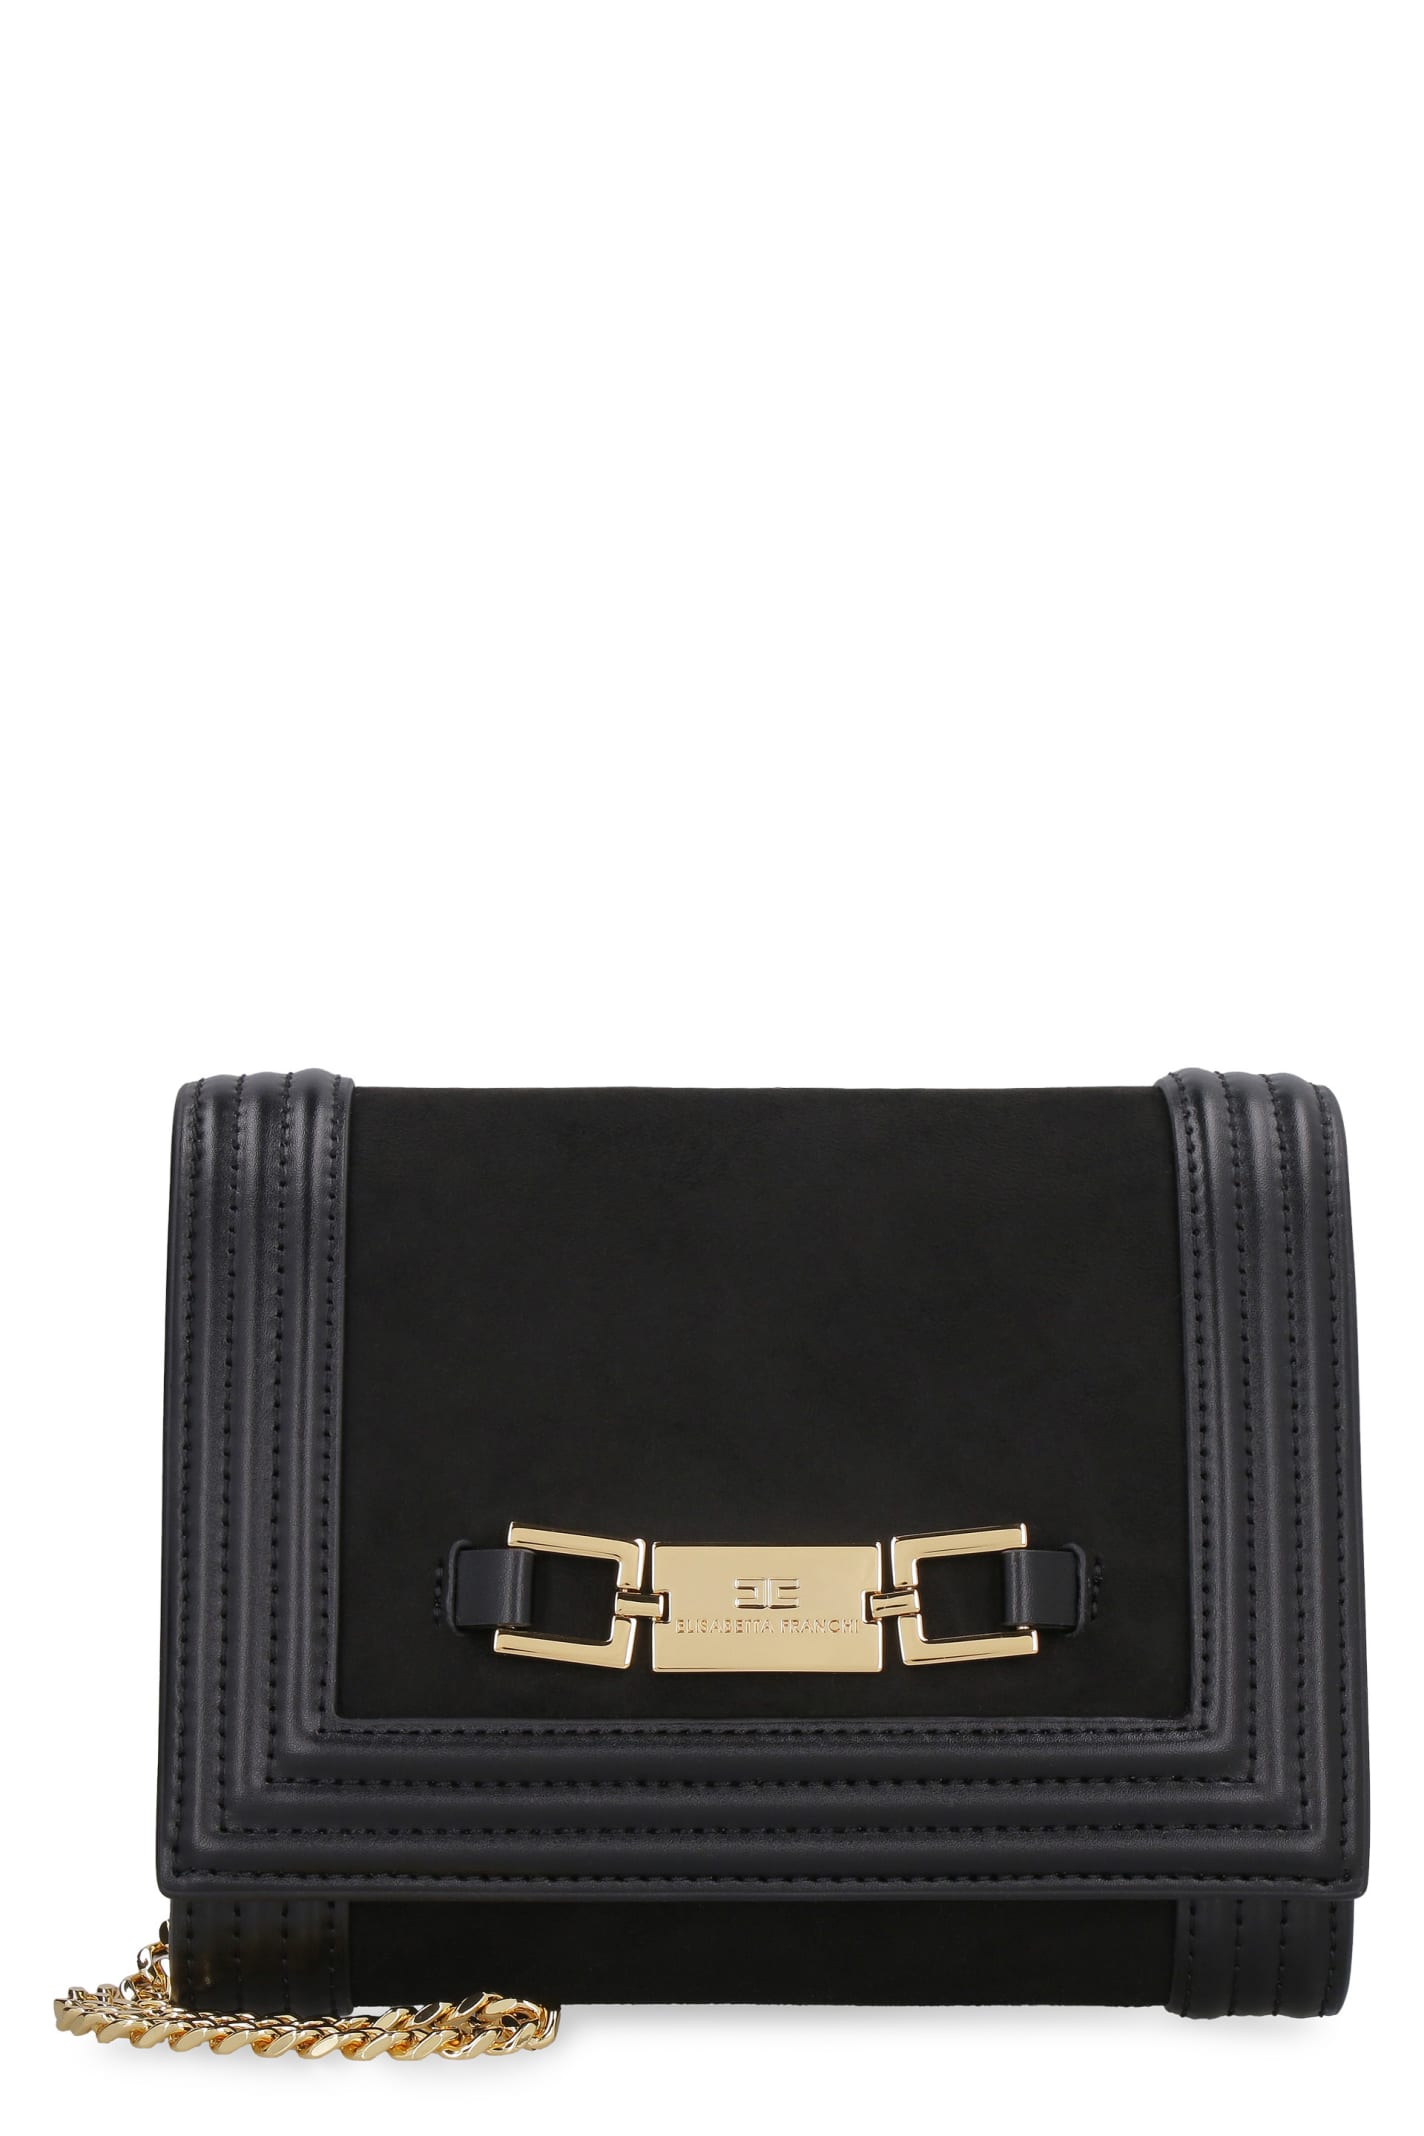 Women's ELISABETTA FRANCHI Bags On Sale, Up To 70% Off | ModeSens